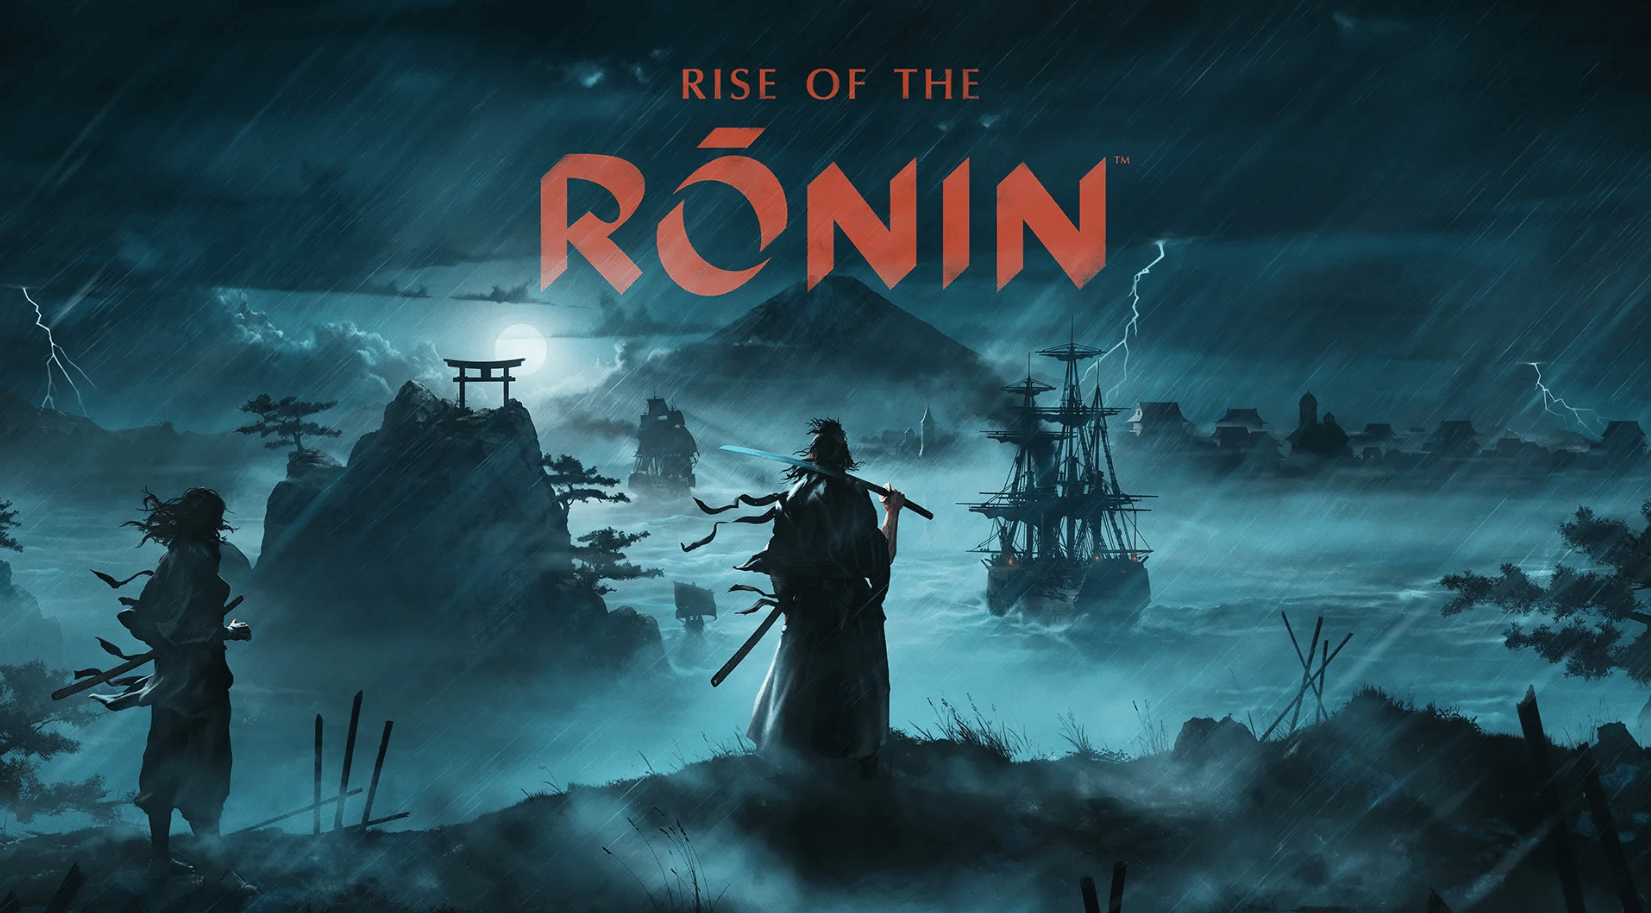 (For Southeast Asia) Rise of the Ronin arrives only on PS5 March 22 